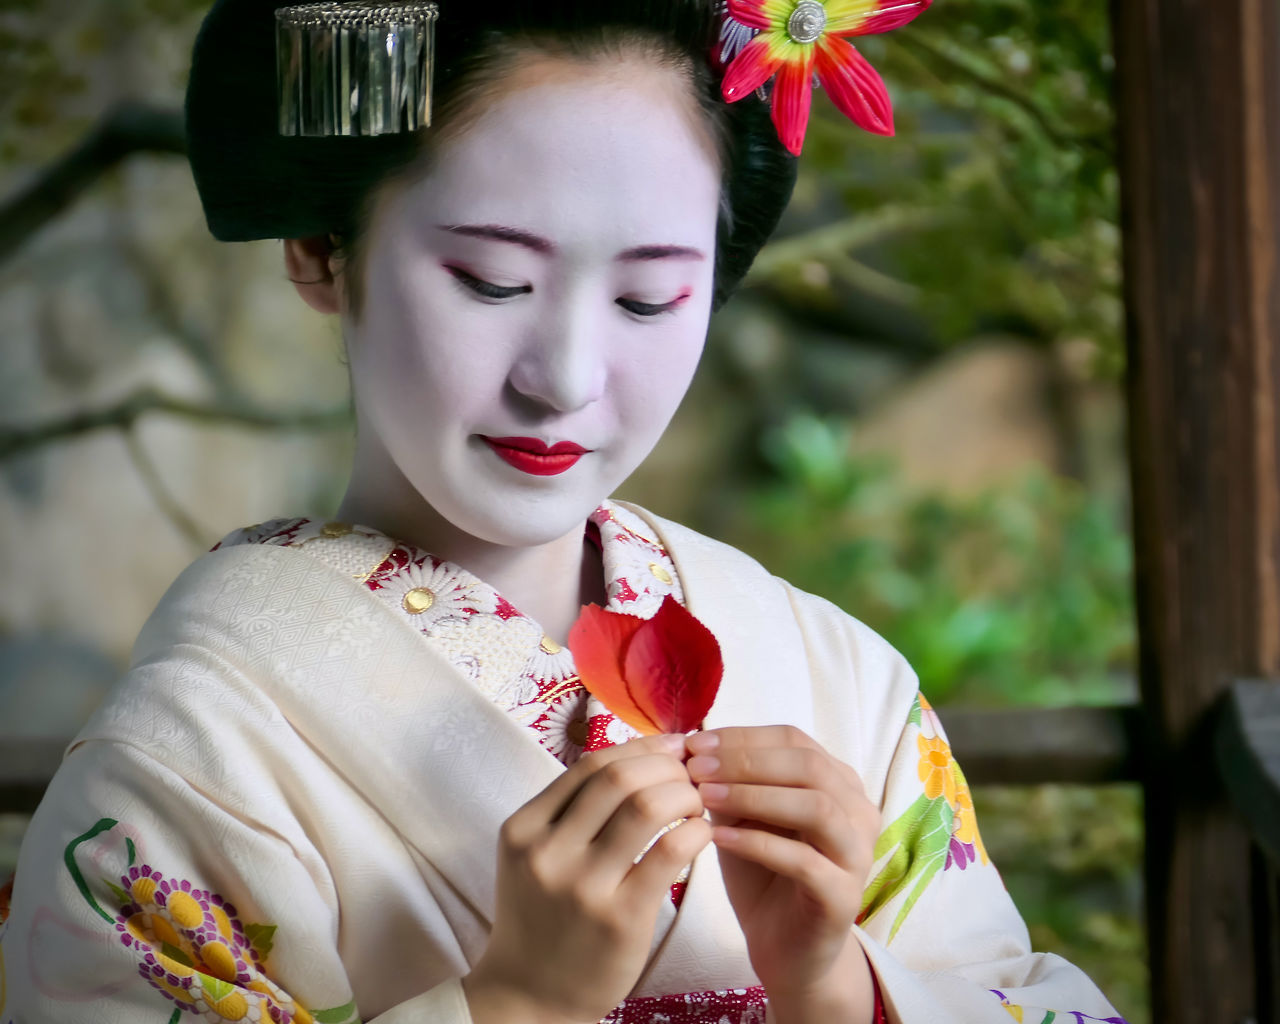 female, culture, women, one person, person, young adult, flower, portrait, adult, clothing, flowering plant, make-up, kimono, nature, plant, beauty in nature, red, fashion, lifestyles, traditional clothing, tradition, front view, costume, outdoors, holding, food and drink, headshot, lipstick, celebration, robe, freshness, food, emotion, spring, arts culture and entertainment, fashion accessory